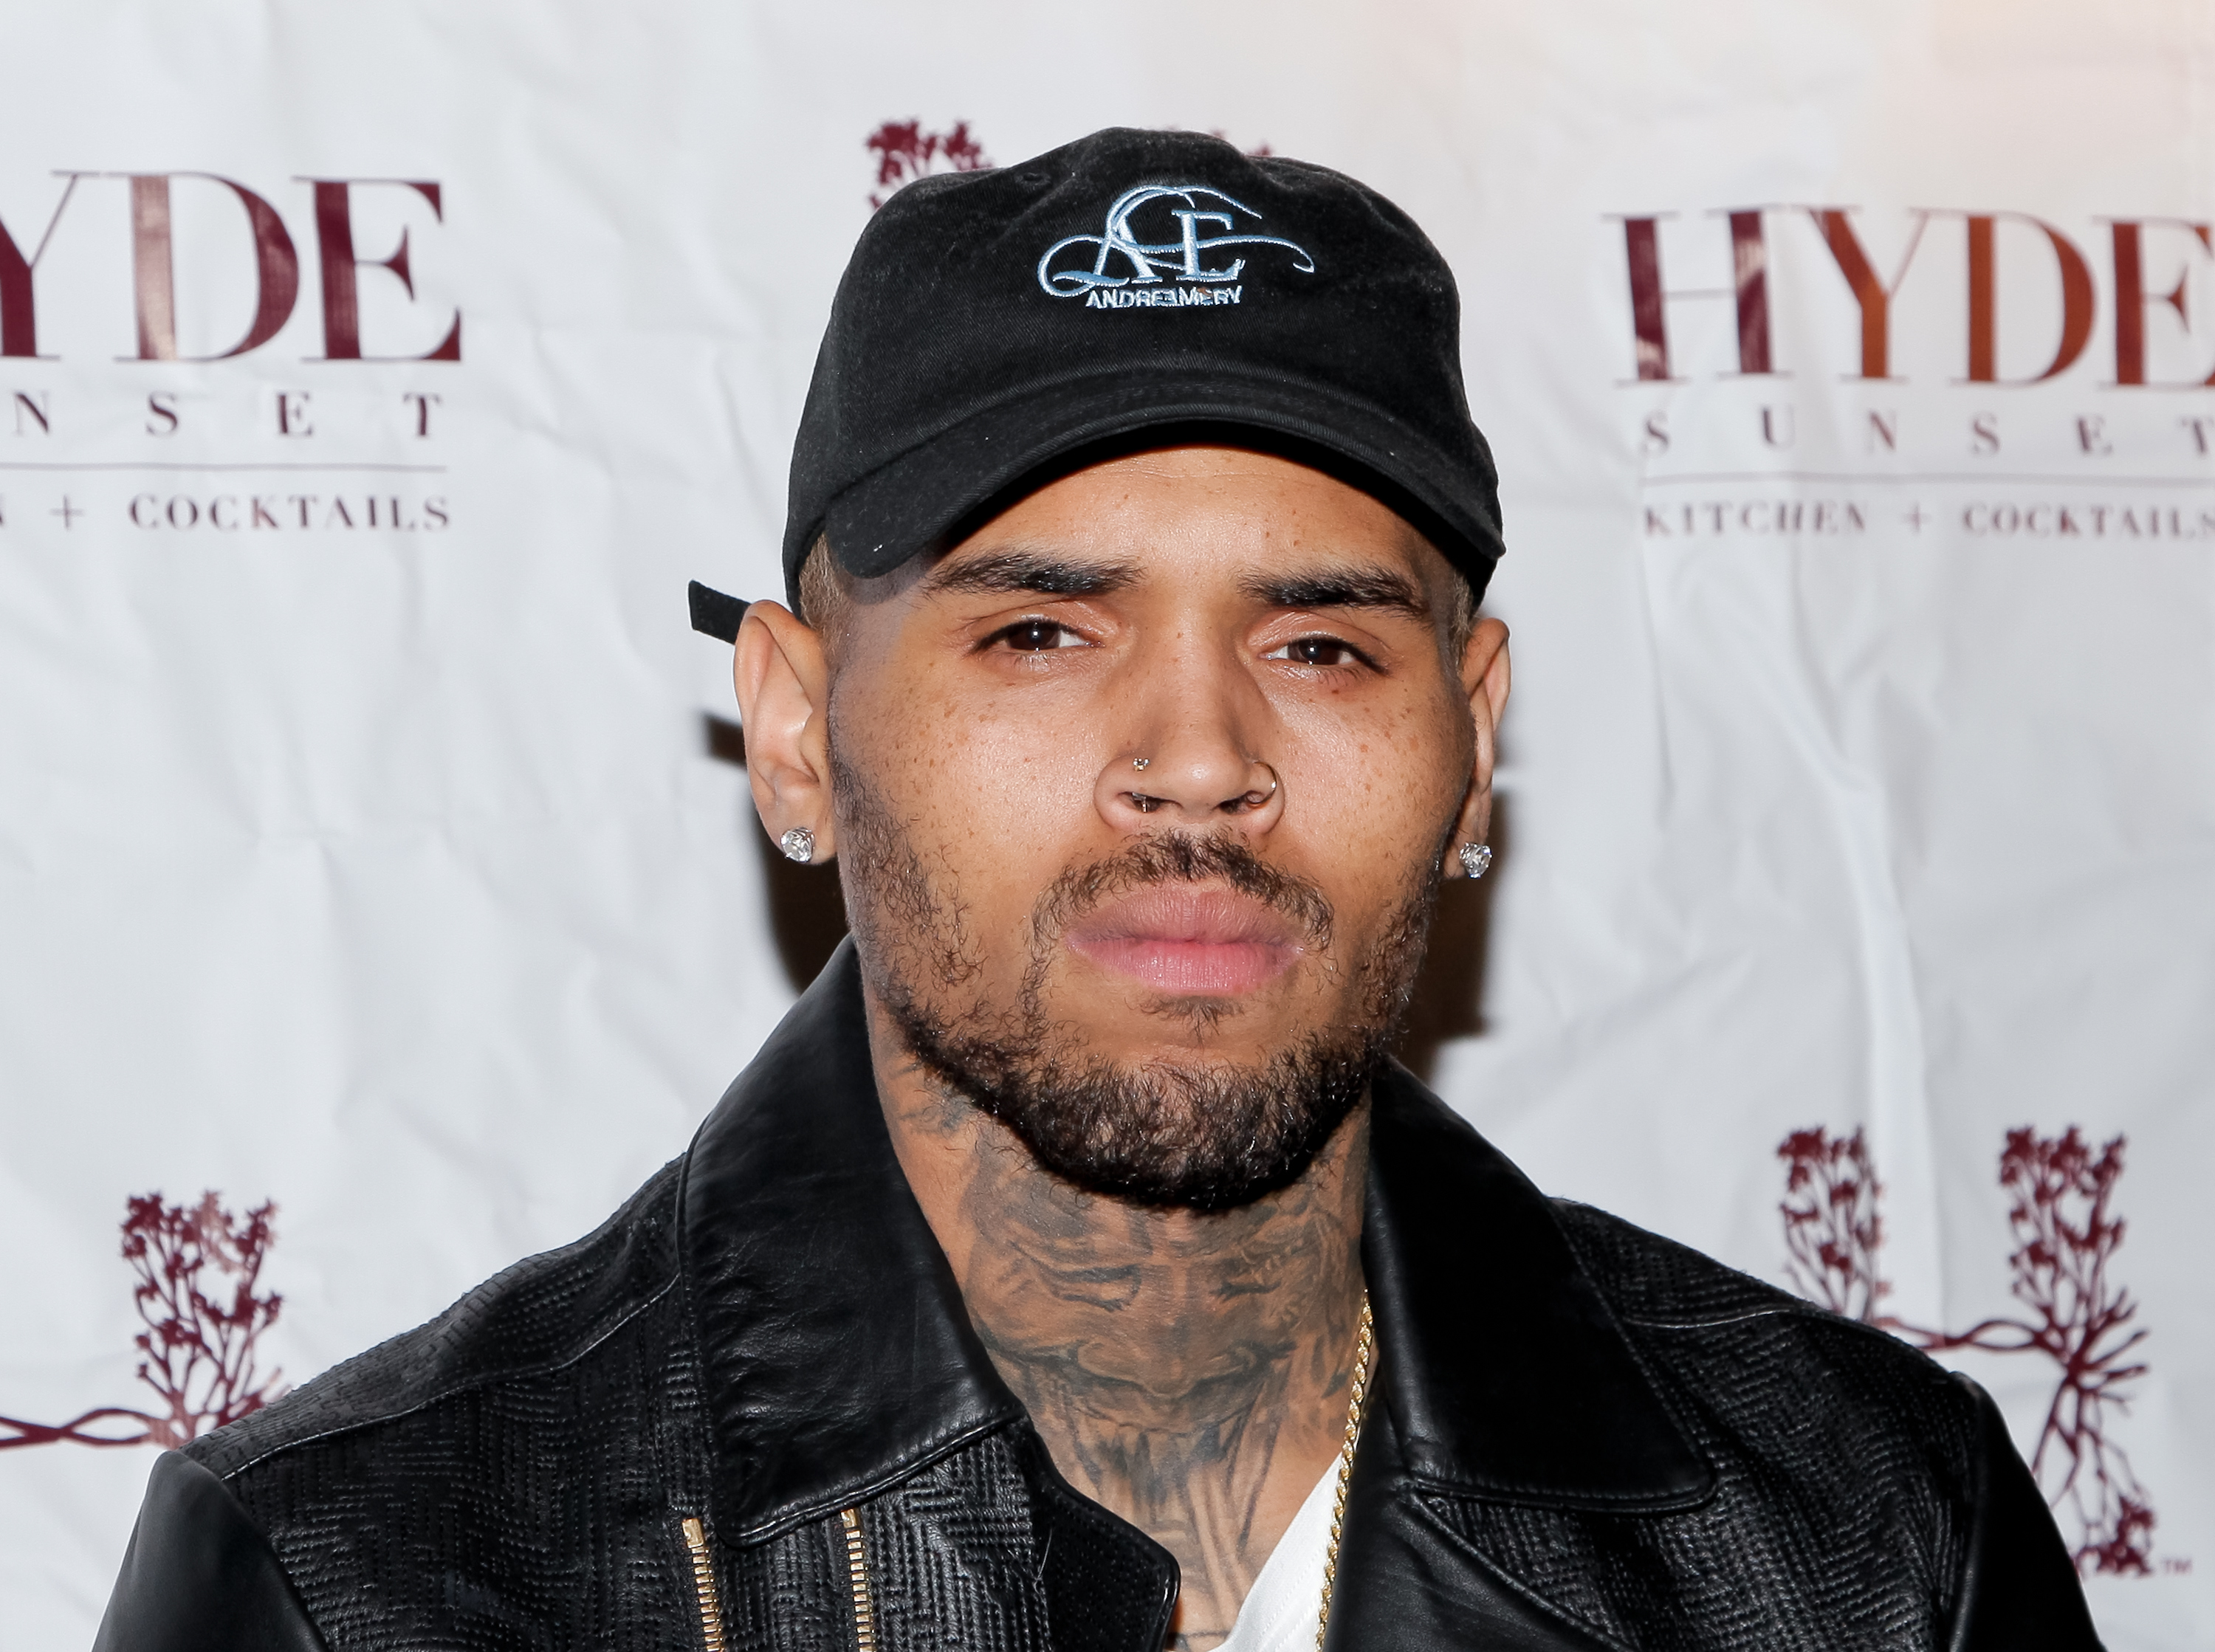 Chris Brown attends "The Lost Warhols" Collection exhibit at HYDE Sunset: Kitchen + Cocktails on Nov. 4, 2015, in West Hollywood, Calif. (Tibrina Hobson—Getty Images)